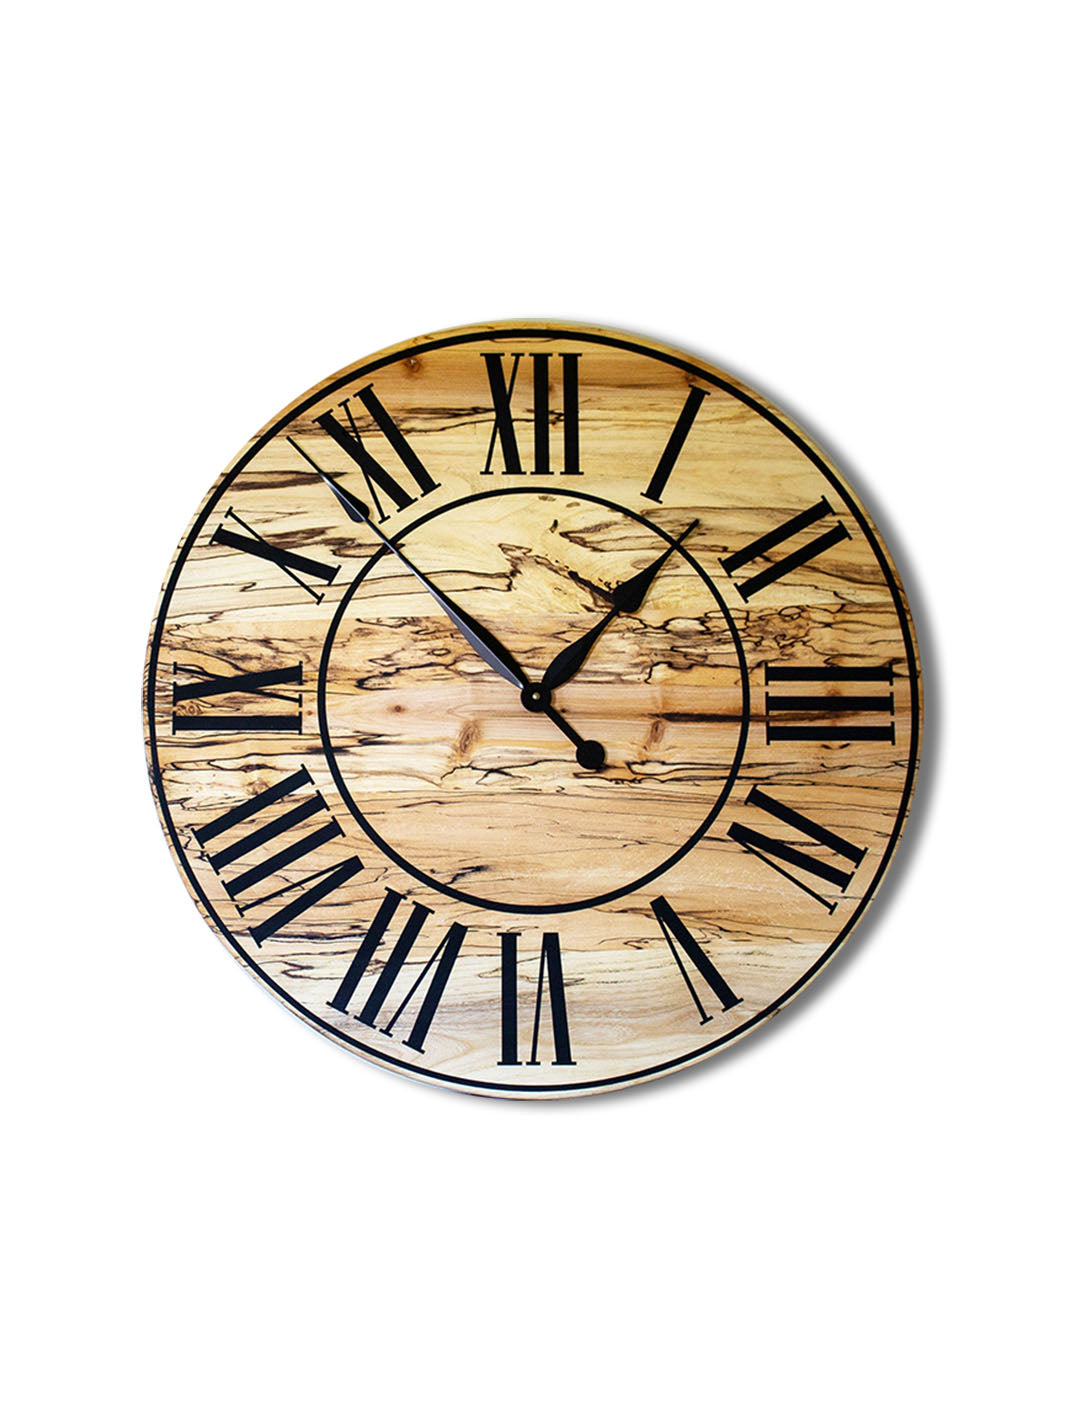 Solid Spalted Maple Wall Clock with Black Lines and Roman Numerals Earthly Comfort Clocks 547